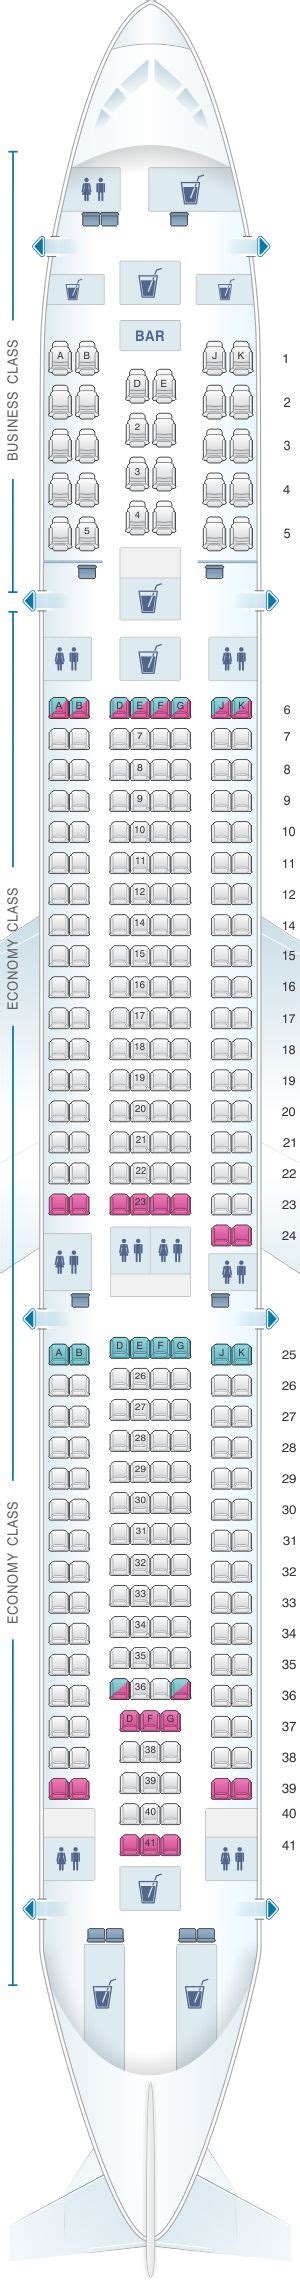 Seat Map Turkish Airlines Airbus A330 300 Hainan Airlines Vietnam